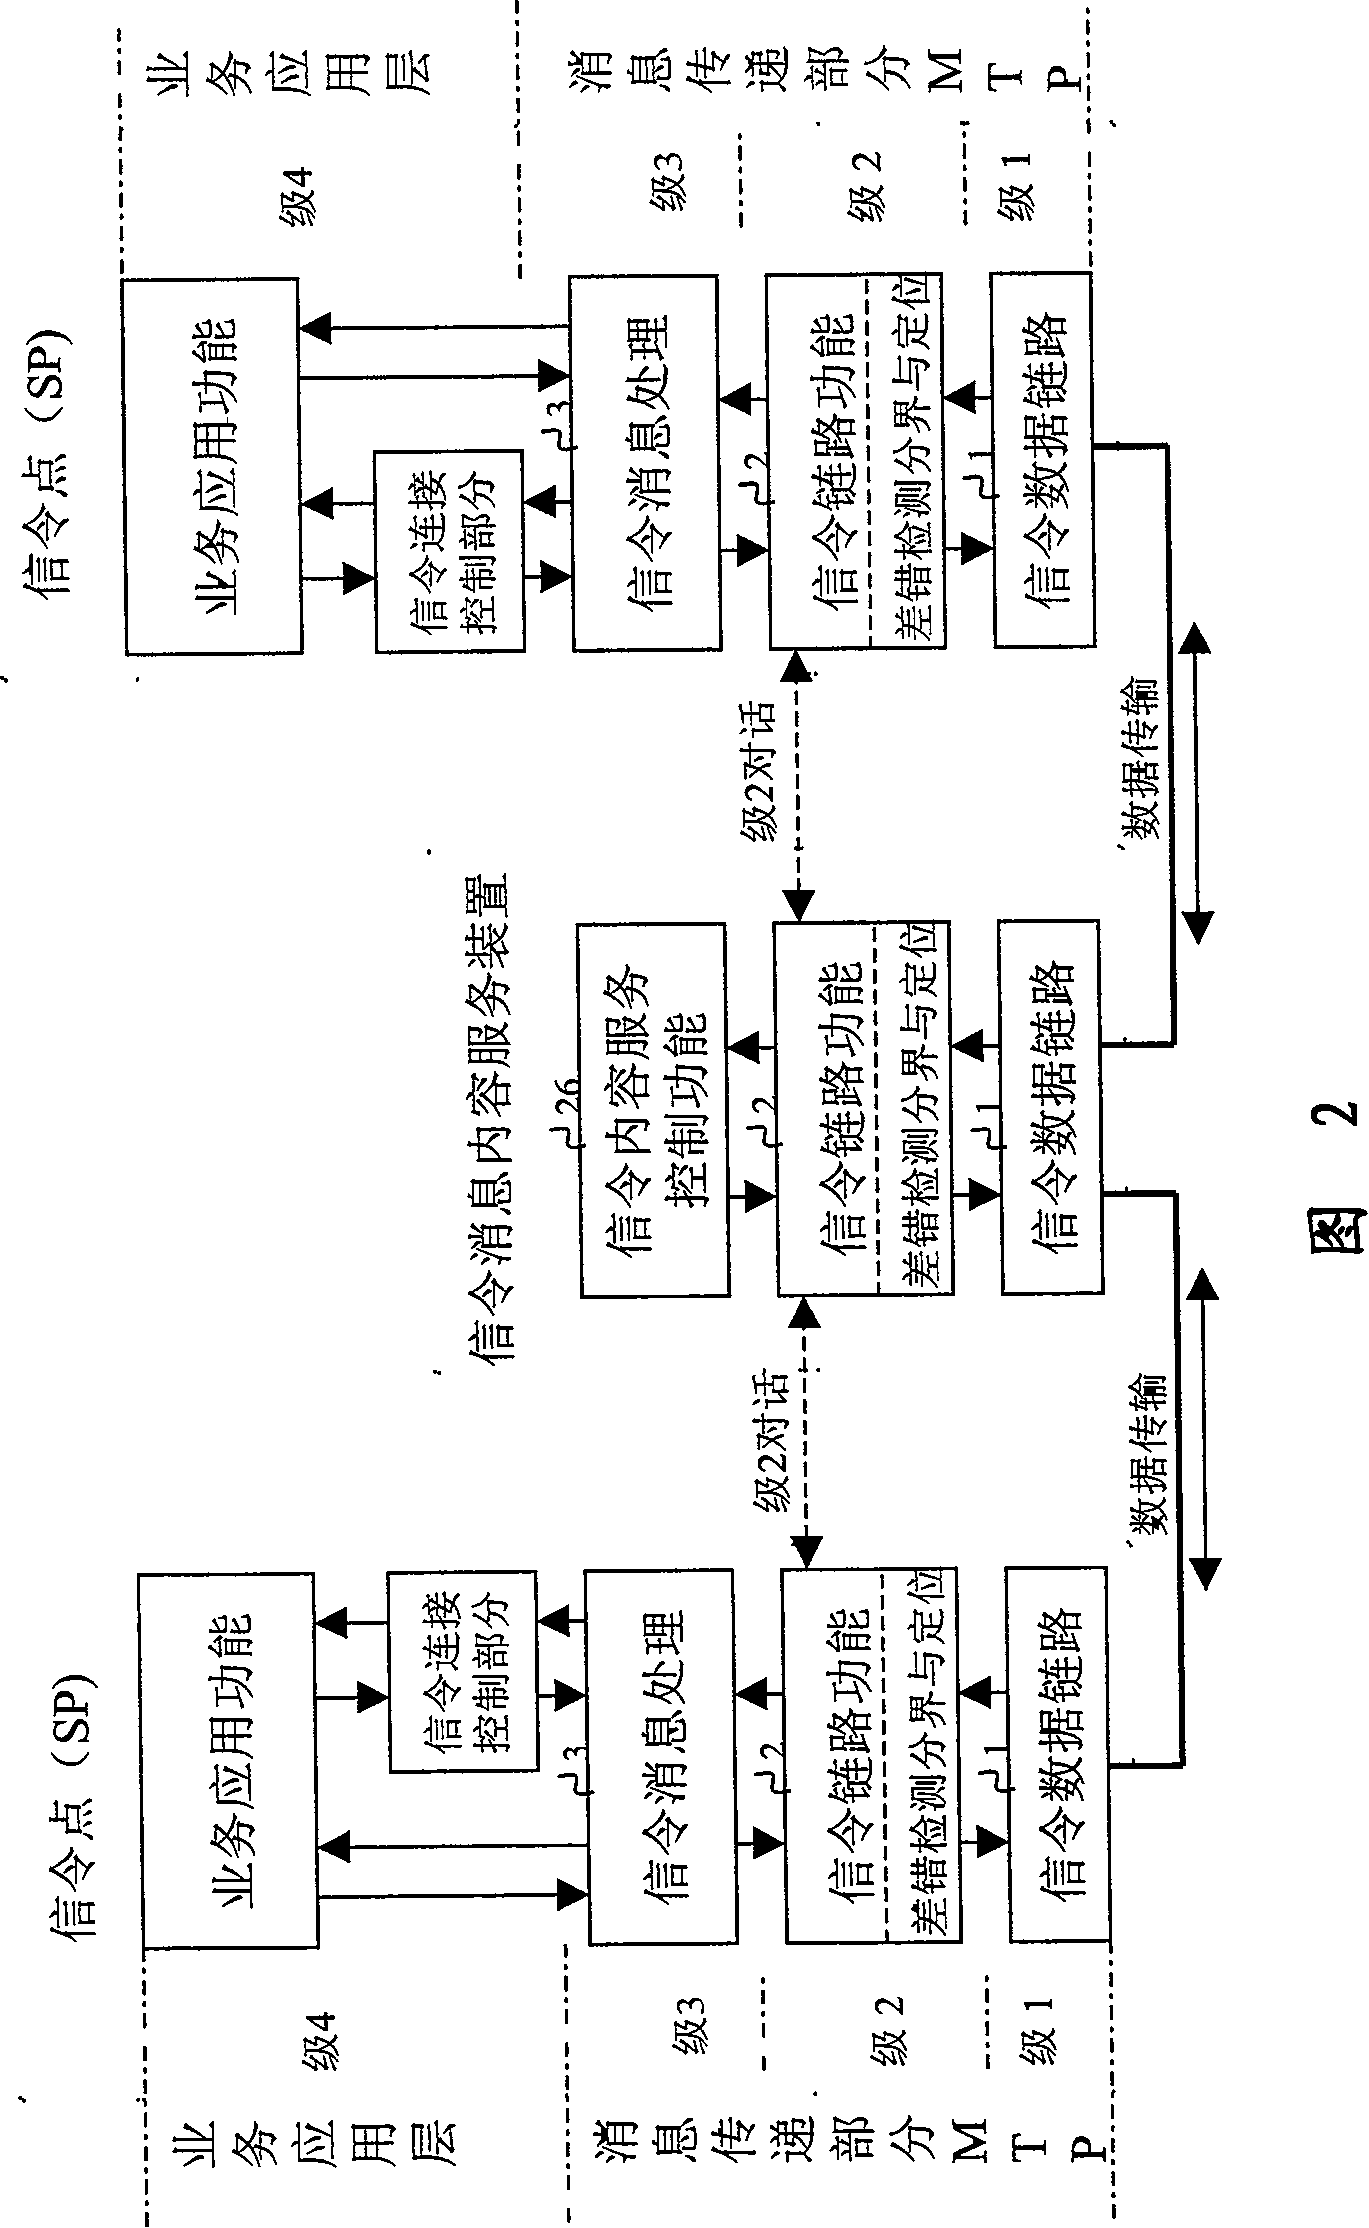 Signaling data identifying and processing method in signaling 7 link functional layer and equipment thereof